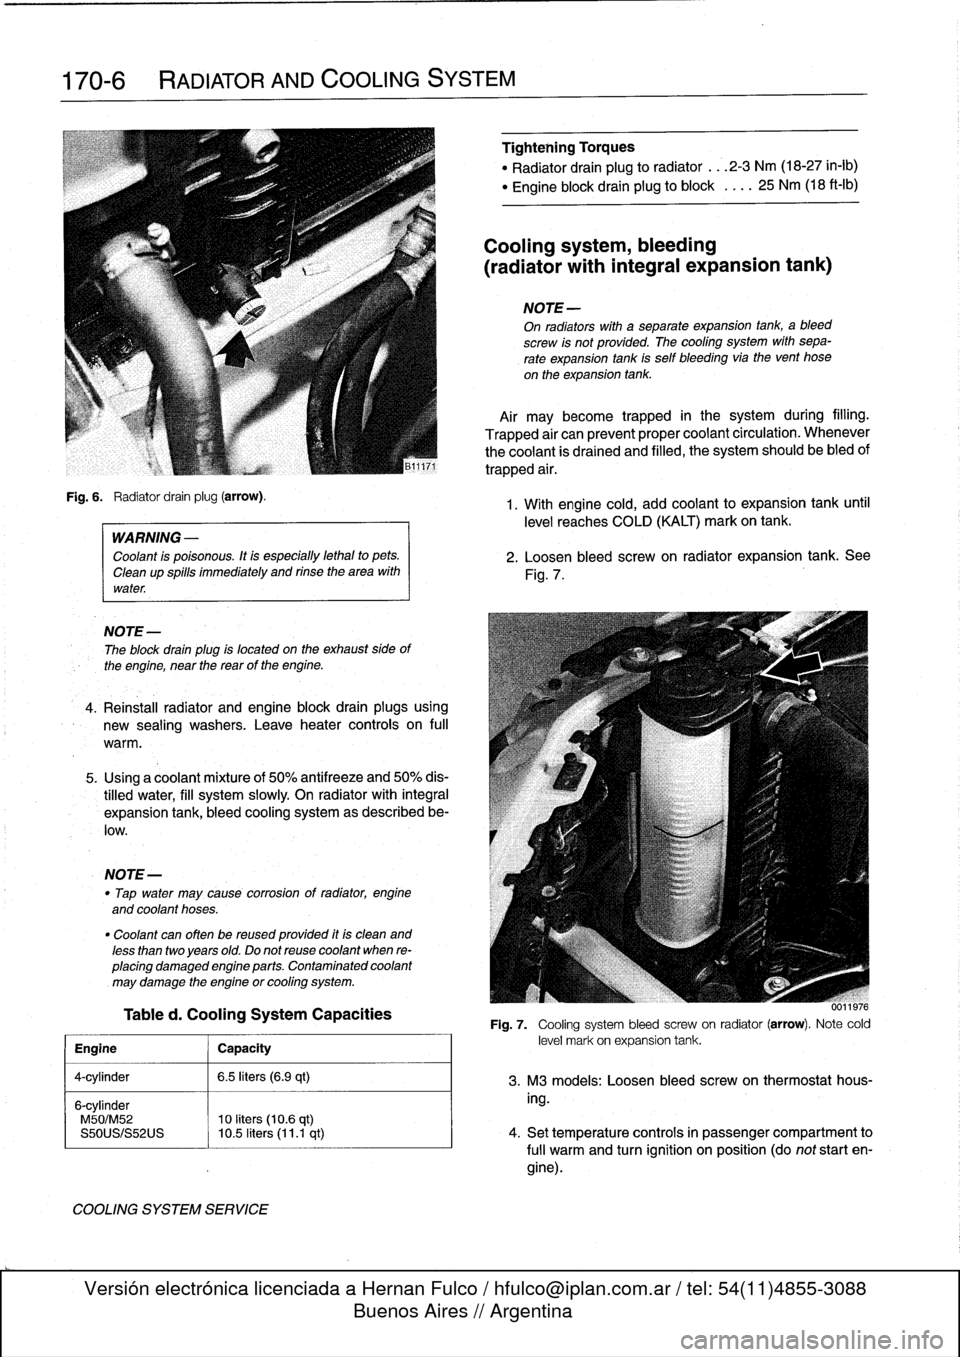 BMW 318i 1997 E36 Workshop Manual 
170-6

	

RADIATOR
AND
COOLING
SYSTEM

Fig
.
6
.

	

Radiator
drain
plug
(arrow)
.

WARNING
-

Coolant
is
poisonous
.
Itis
especially
lethal
to
pets
.

Cleanup
spills
immediately
and
rinse
the
area
w